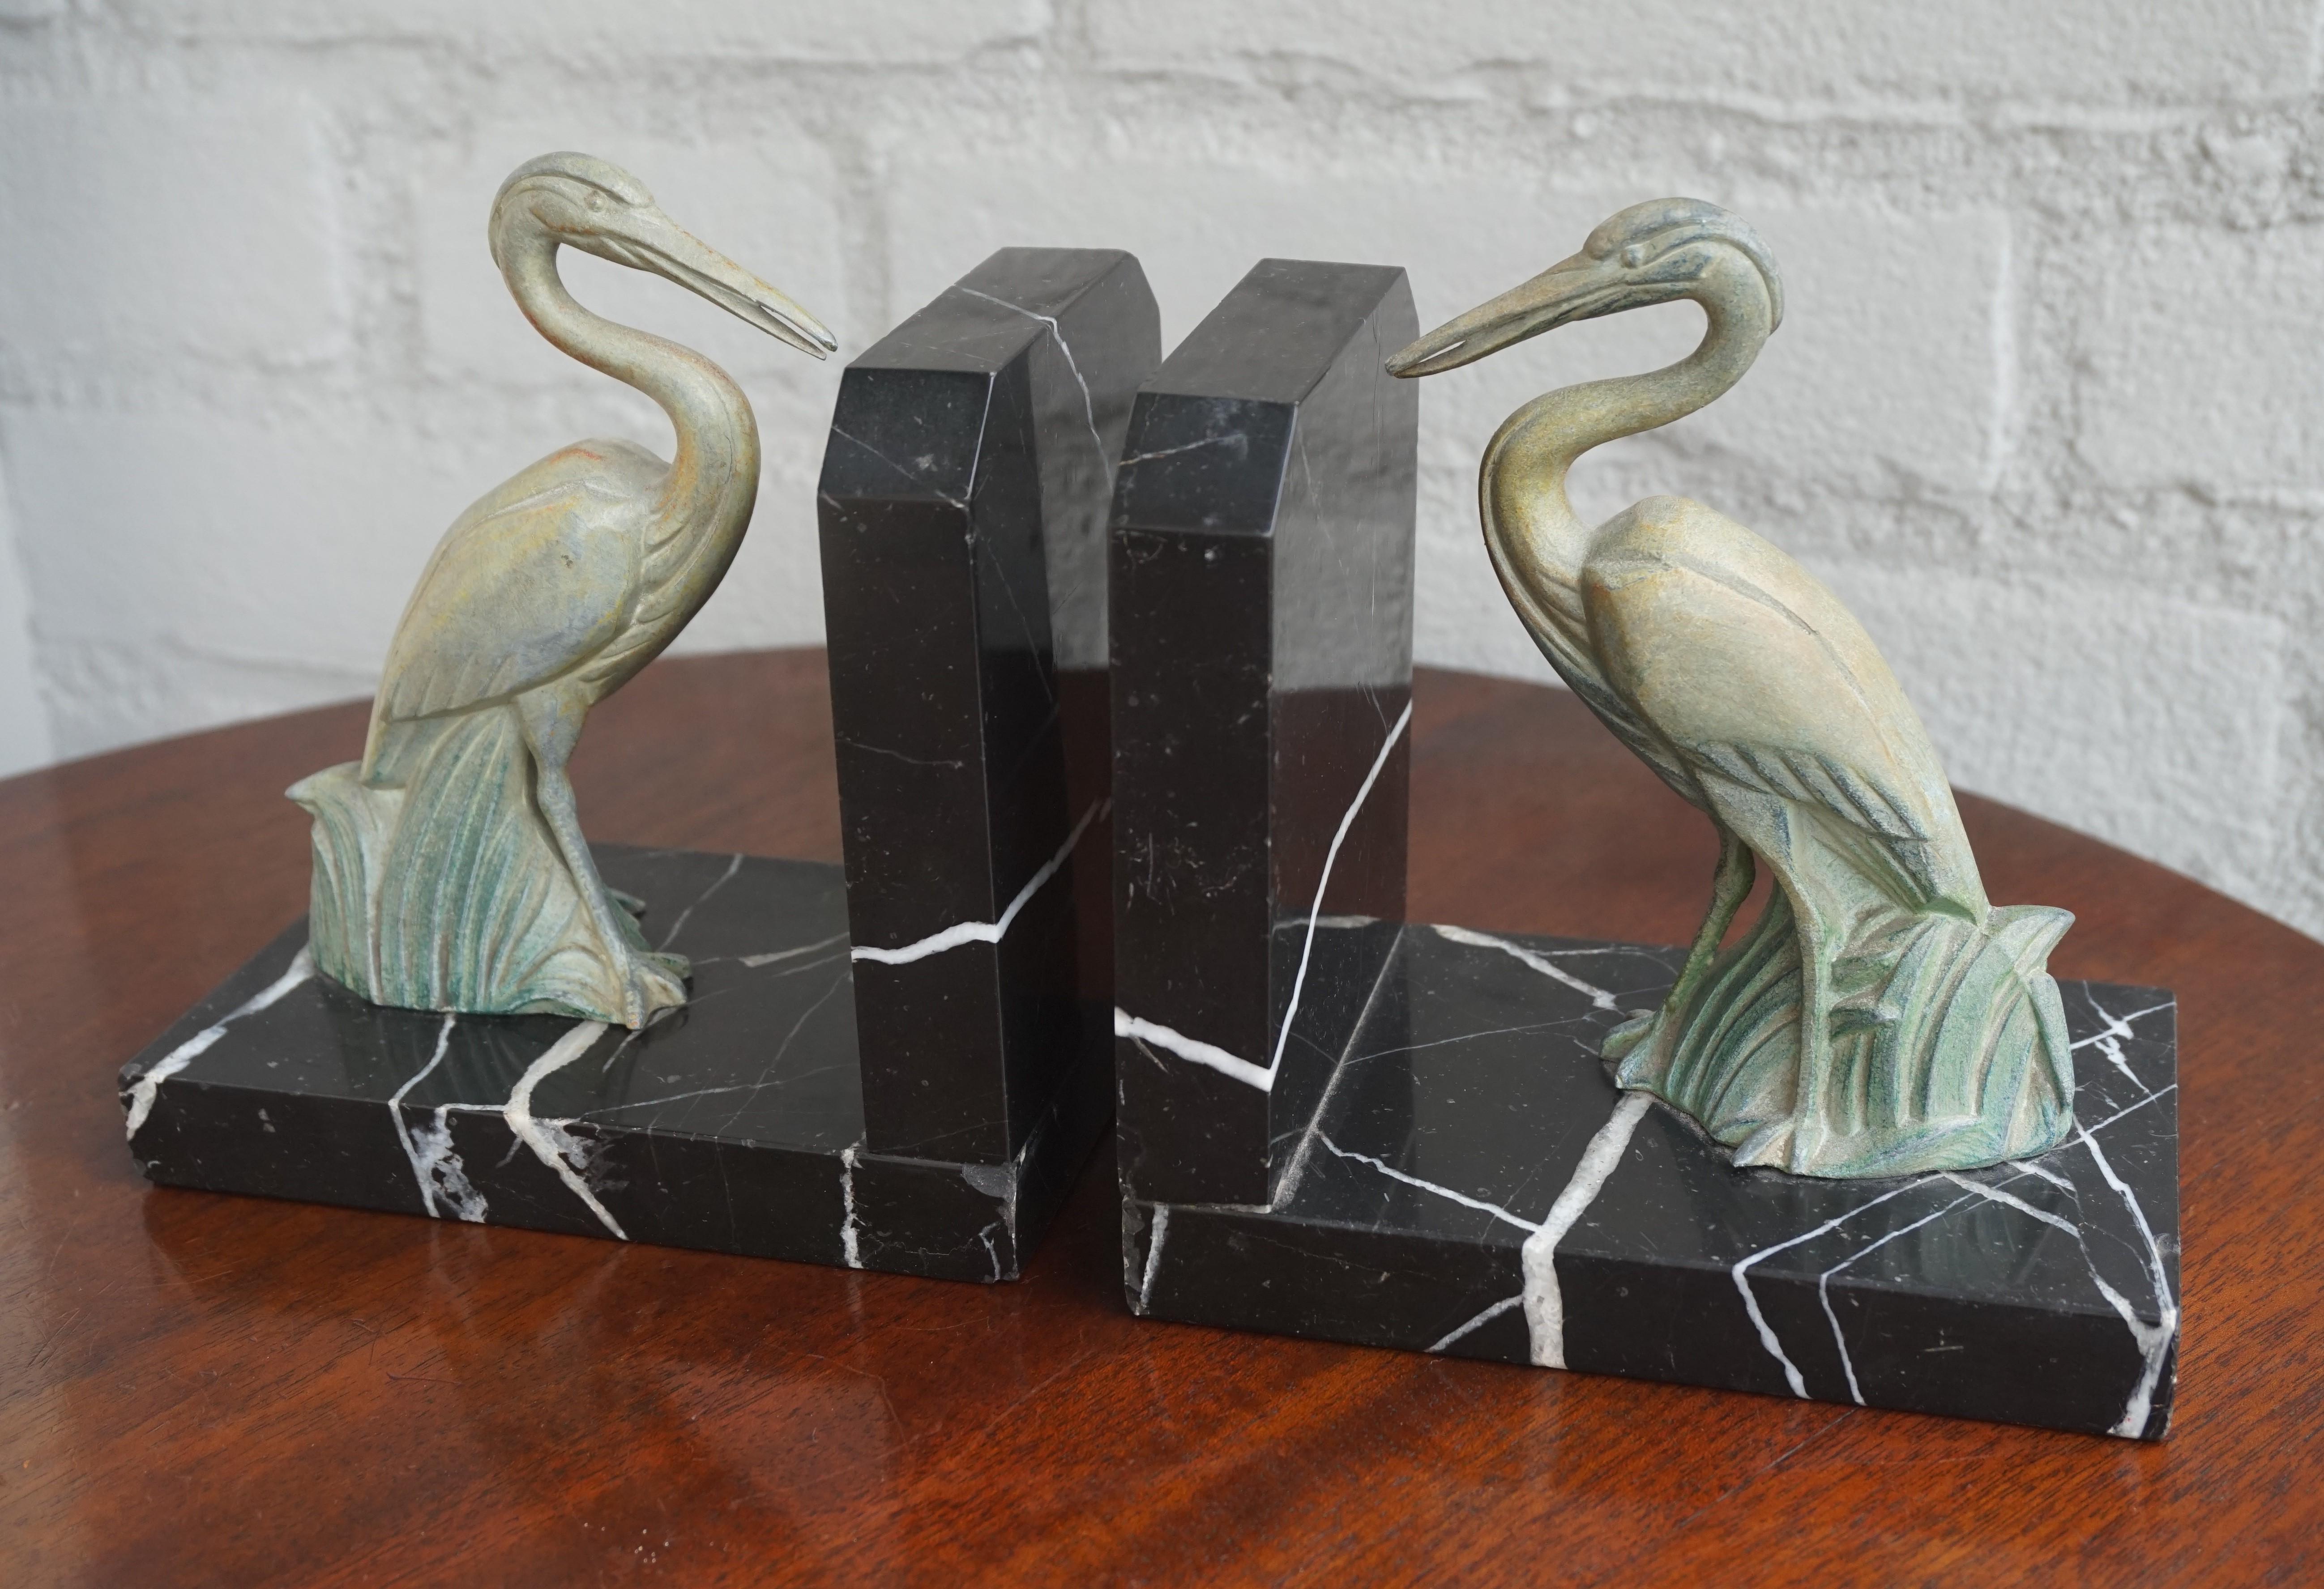 Beautiful and rare pair of sculptural Art Deco bookends.

These small size black and white marble bookends come with a pair of beautifully sculptured, standing storks in the reeds. They are much like the green Art Deco sculptures that Max Le Verrier